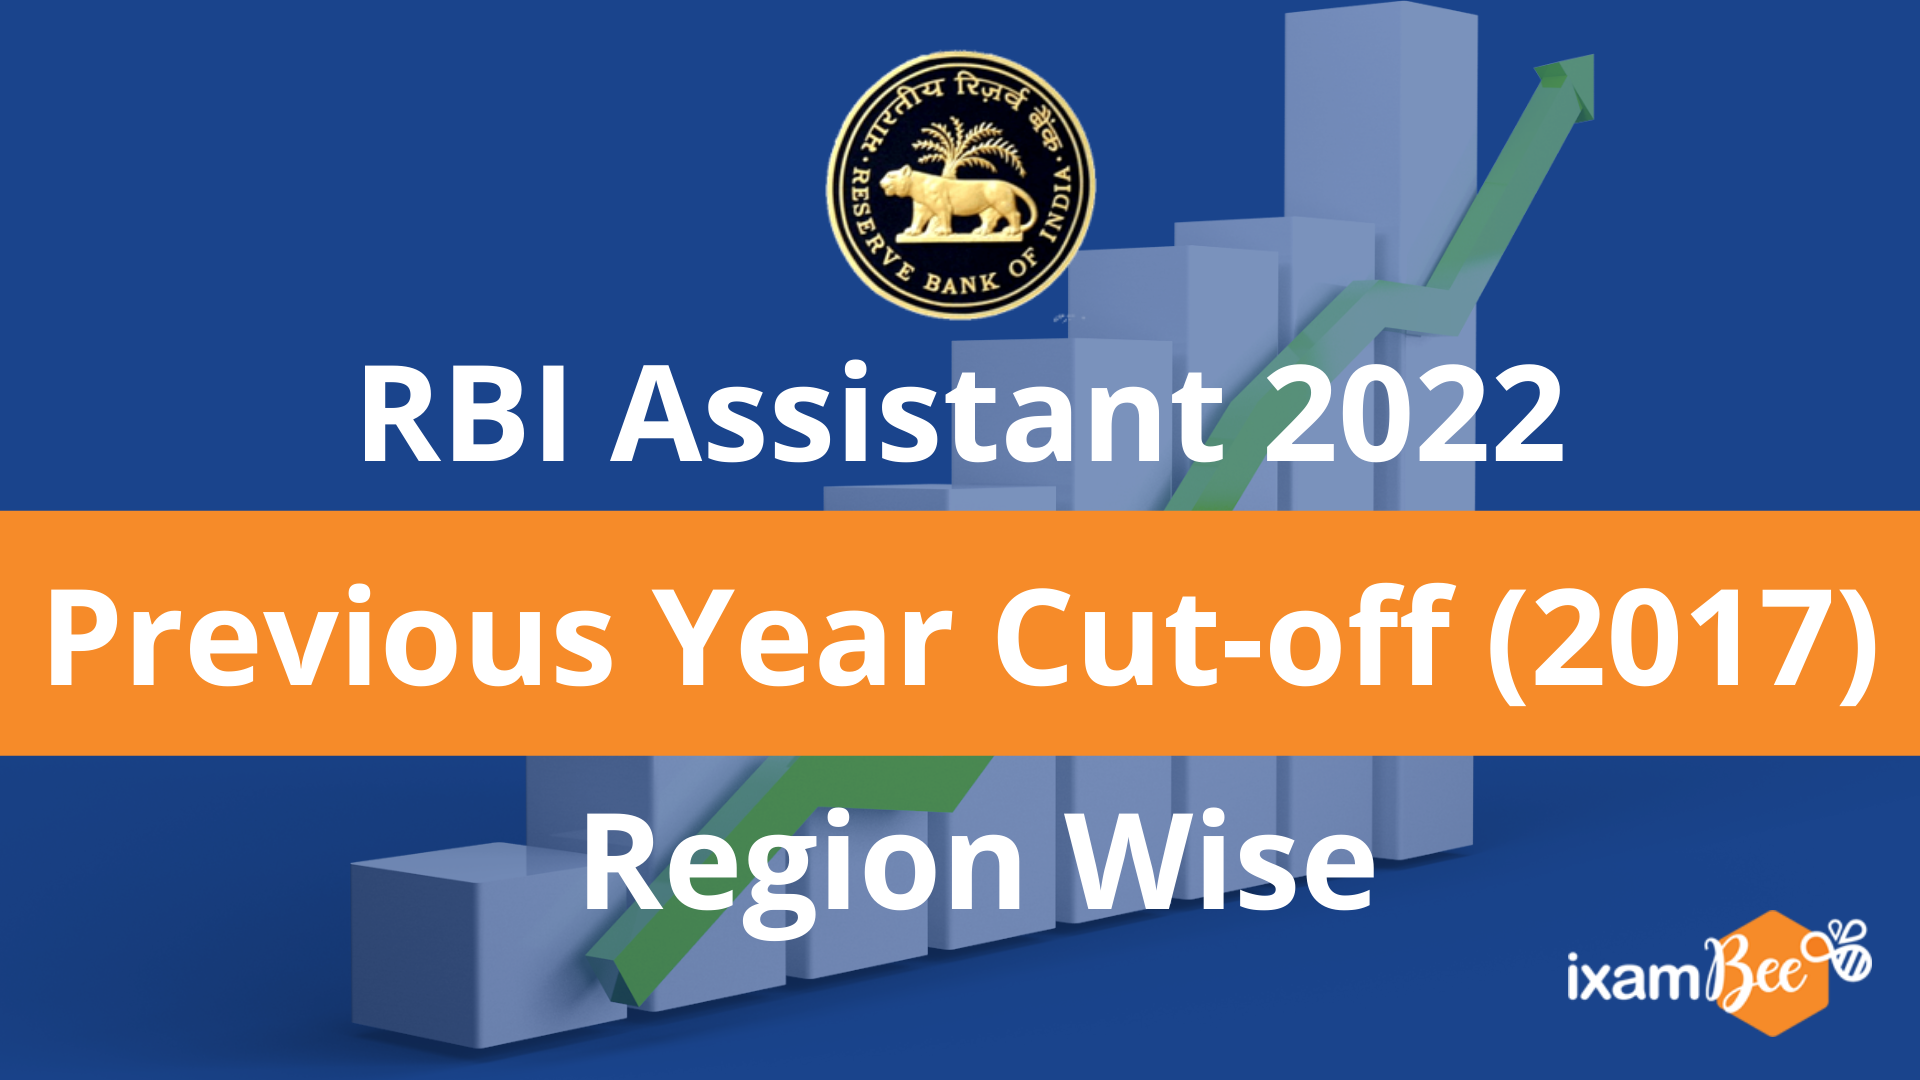 RBI Assistant 2022: Previous Year Cut Off (2017) Region Wise